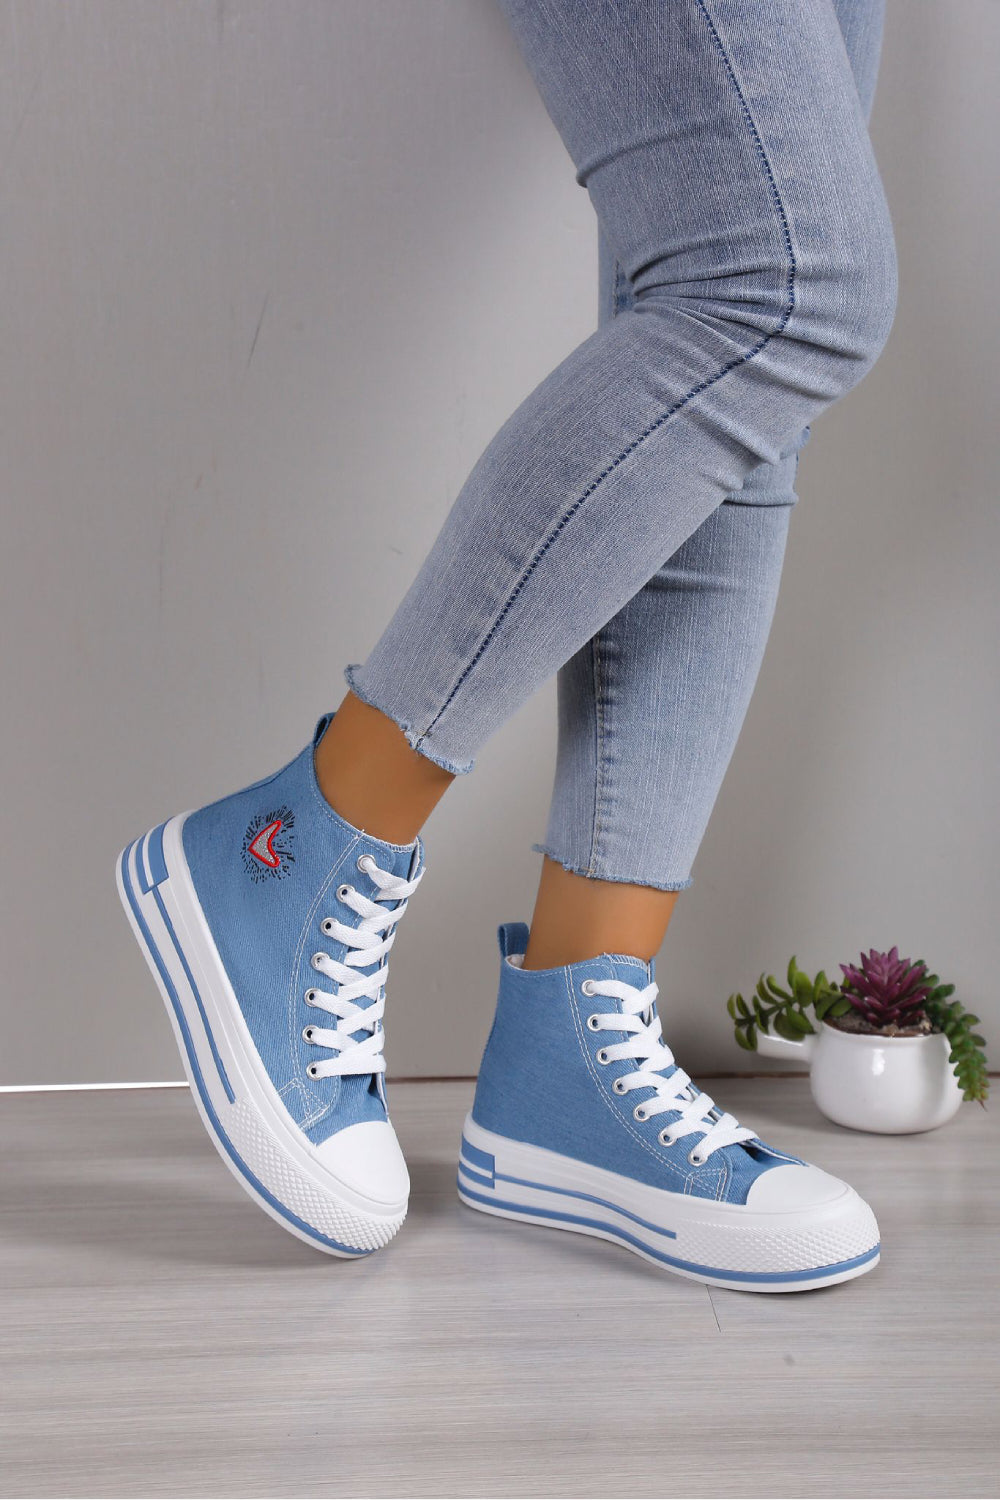 BLUE CANVAS HIGH TOP LACE UP SNEAKERS TRAINERS